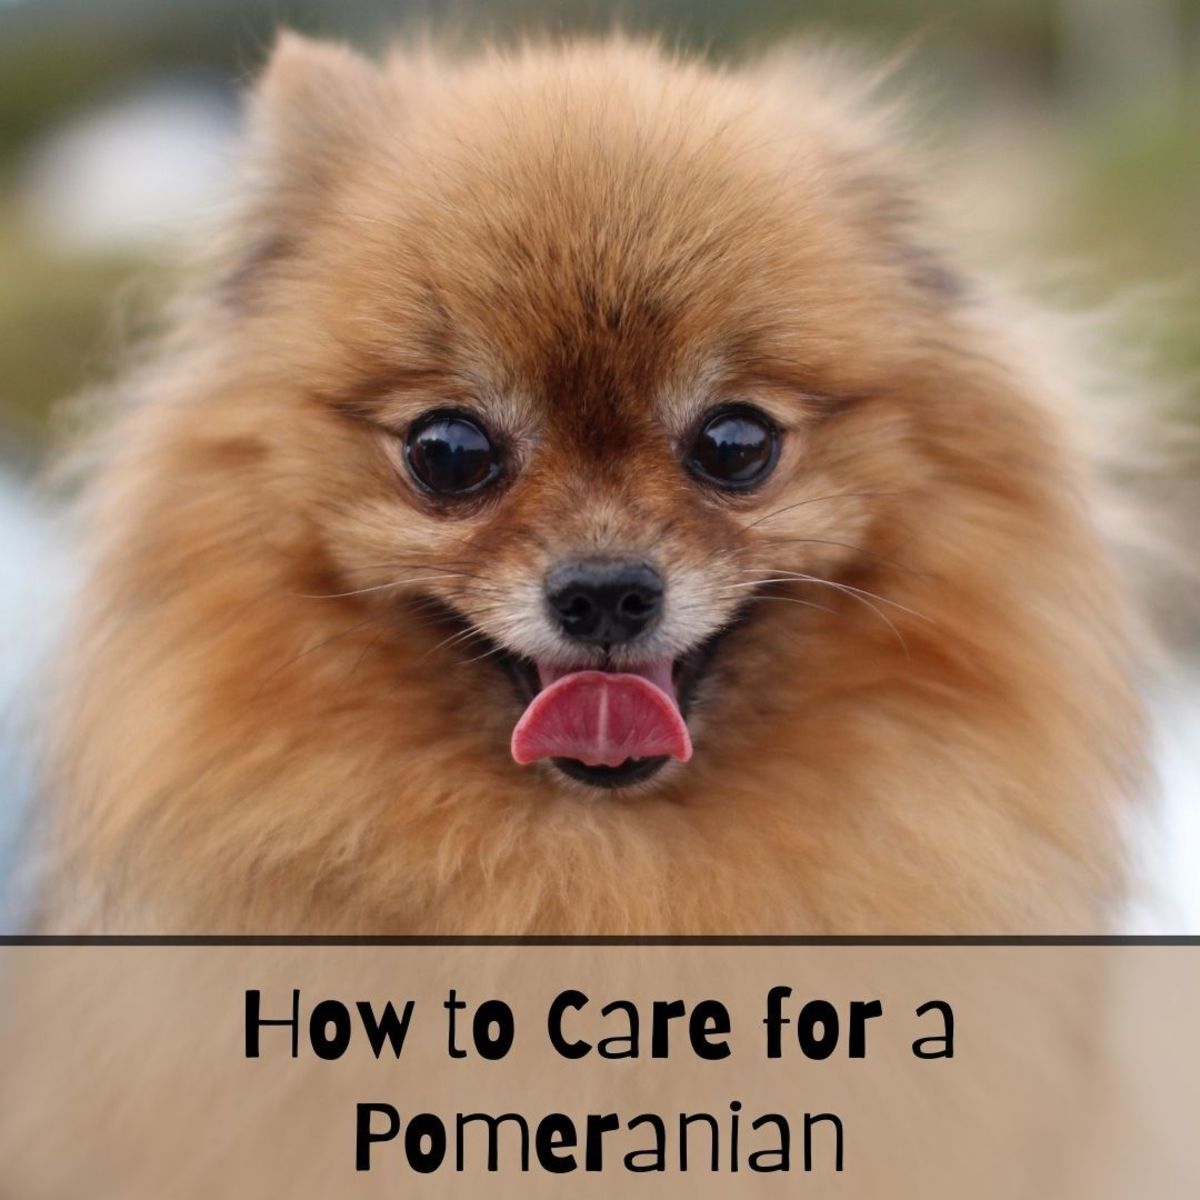 Pomeranians are awesome—do you have what it takes to care for one?